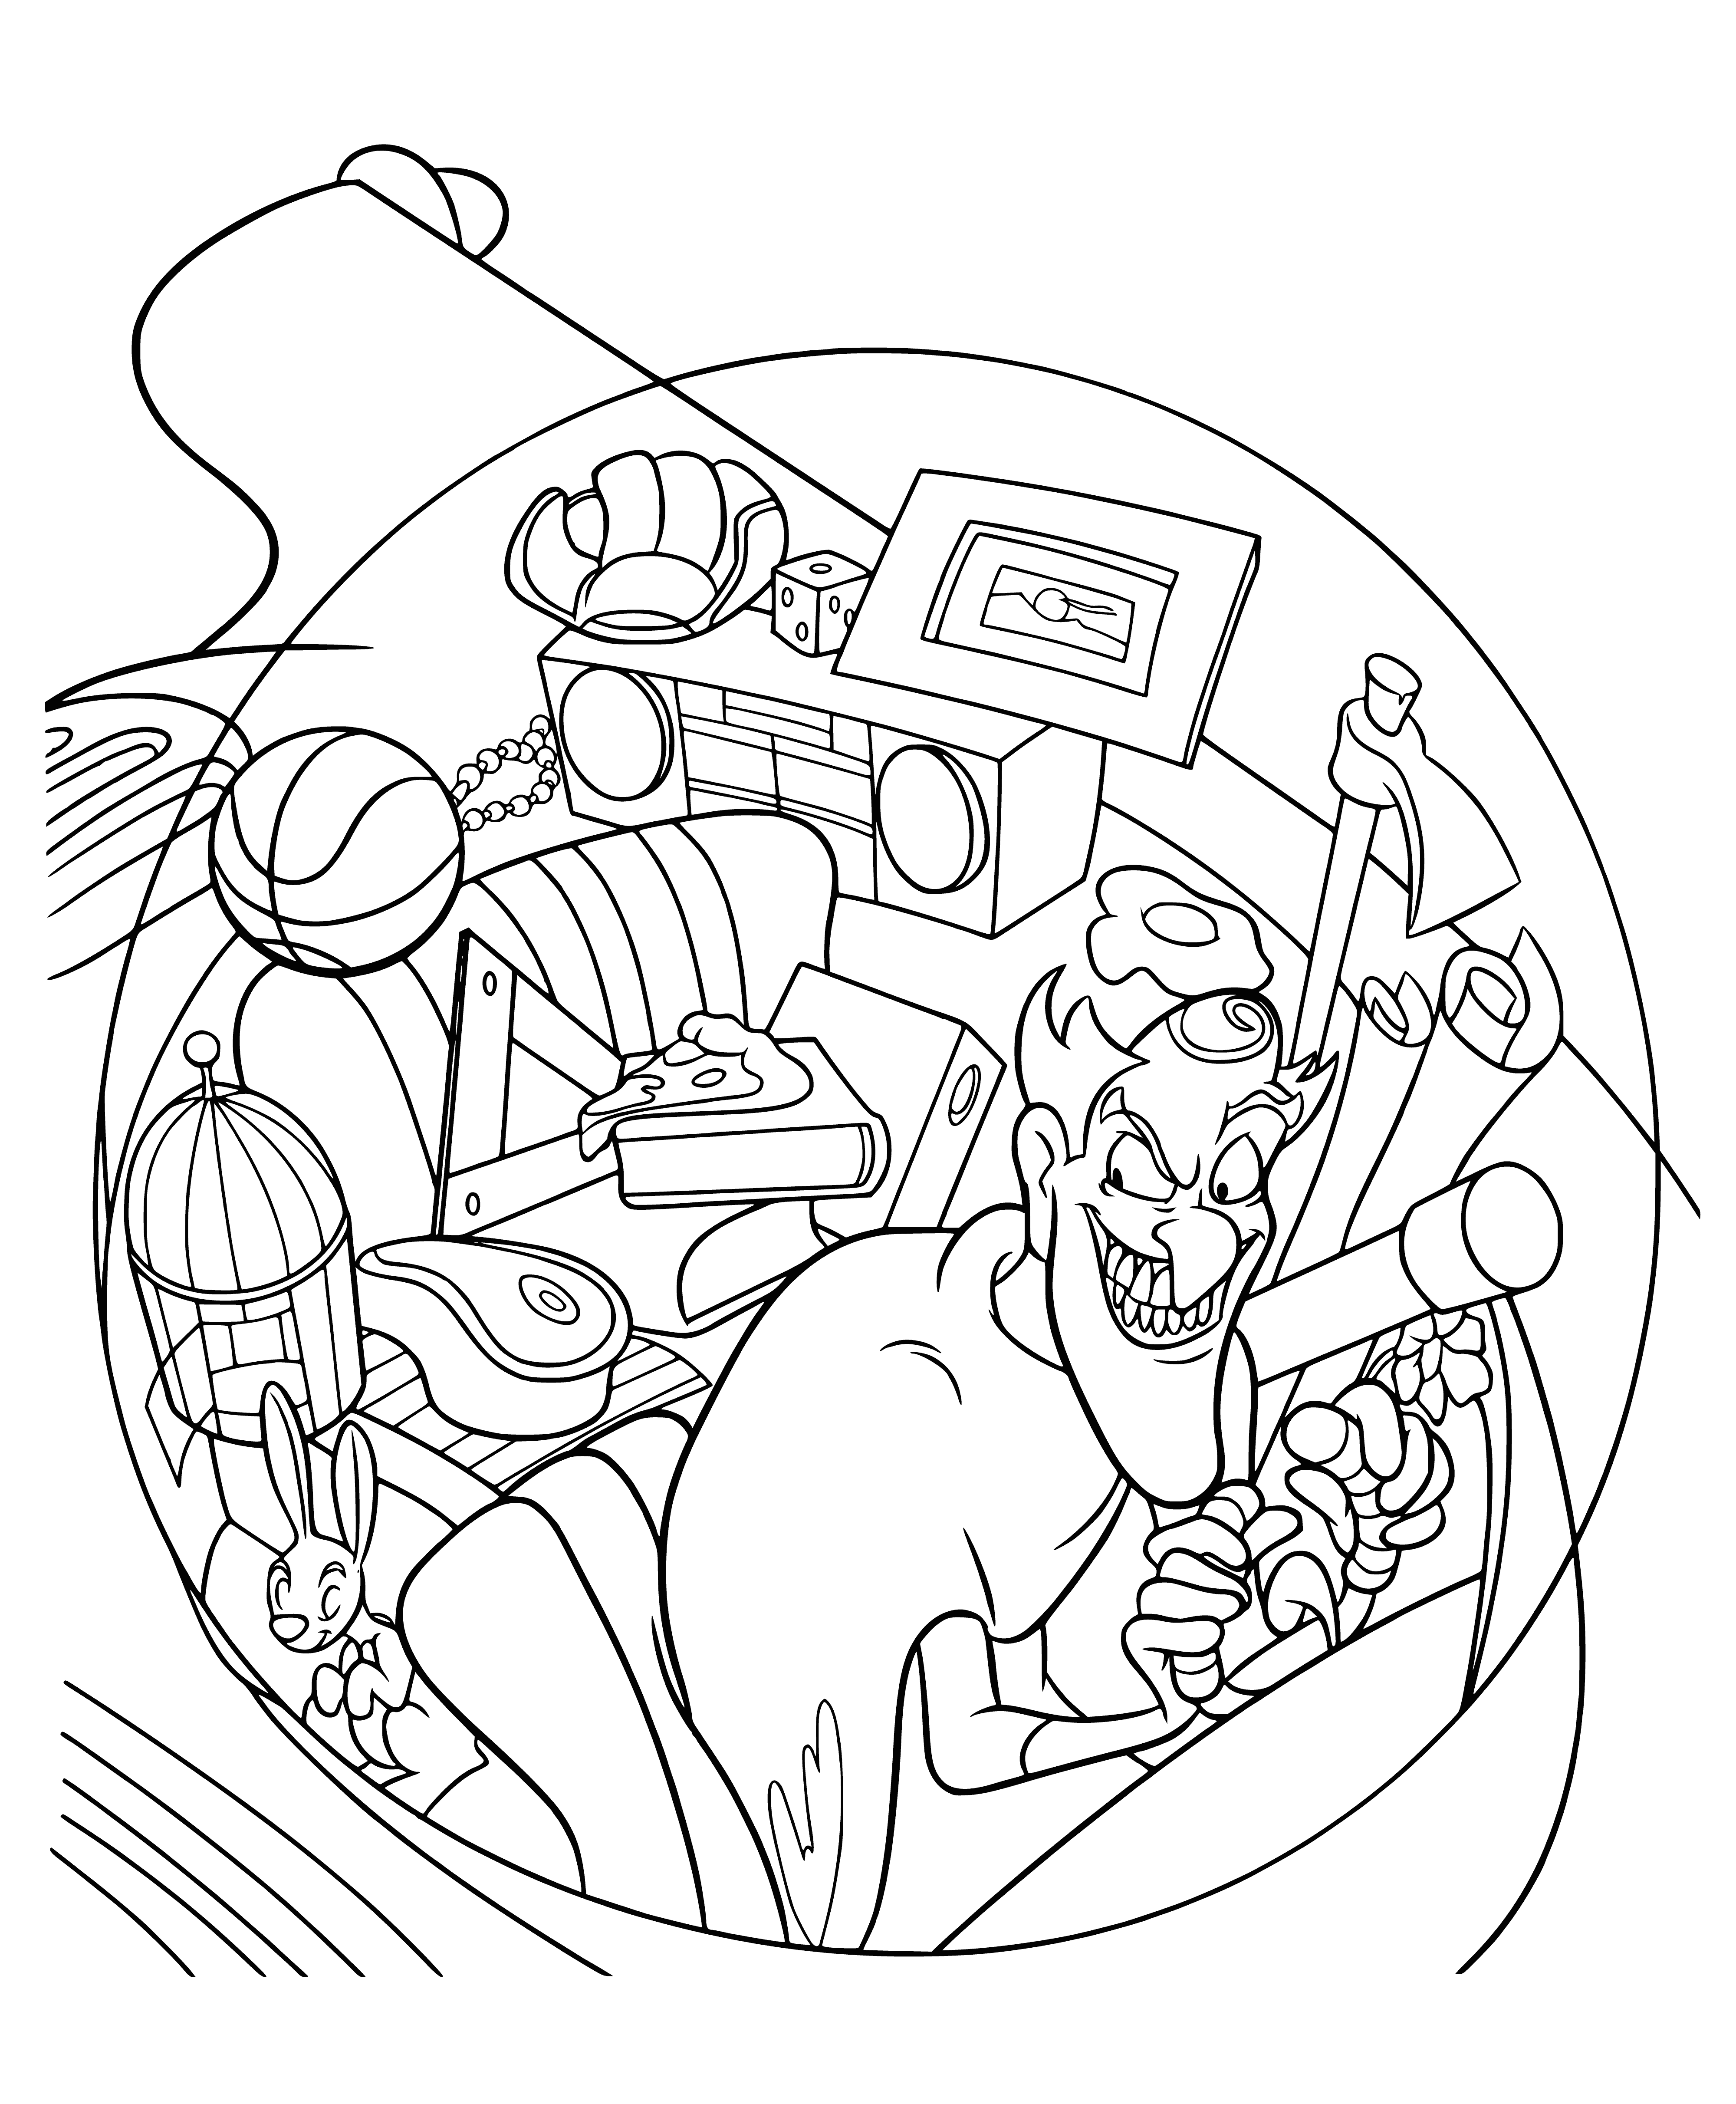 Time Machine coloring page